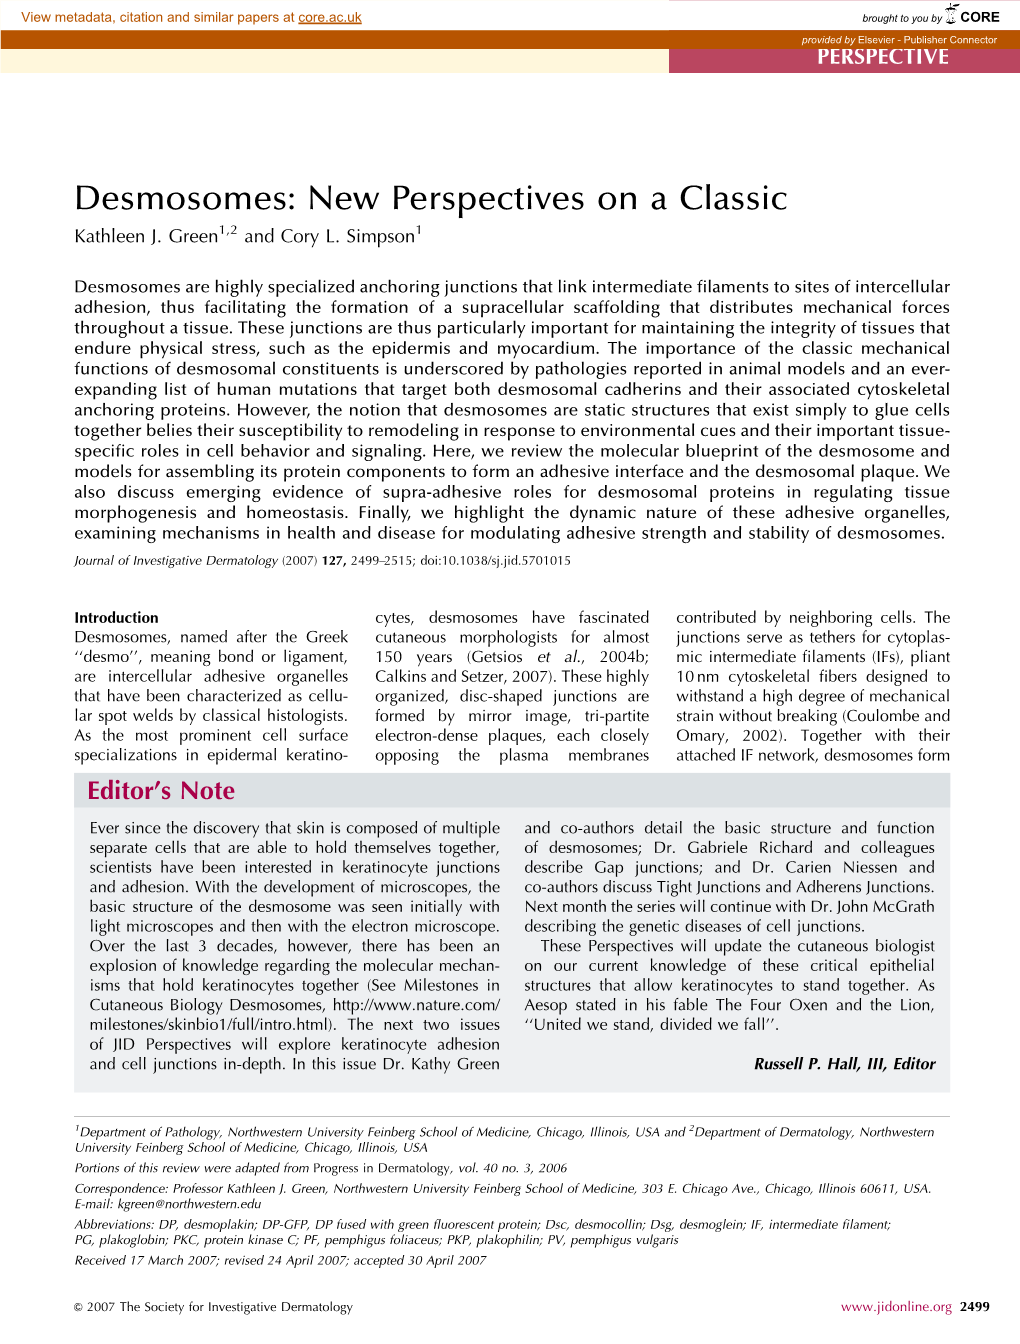 Desmosomes: New Perspectives on a Classic Kathleen J